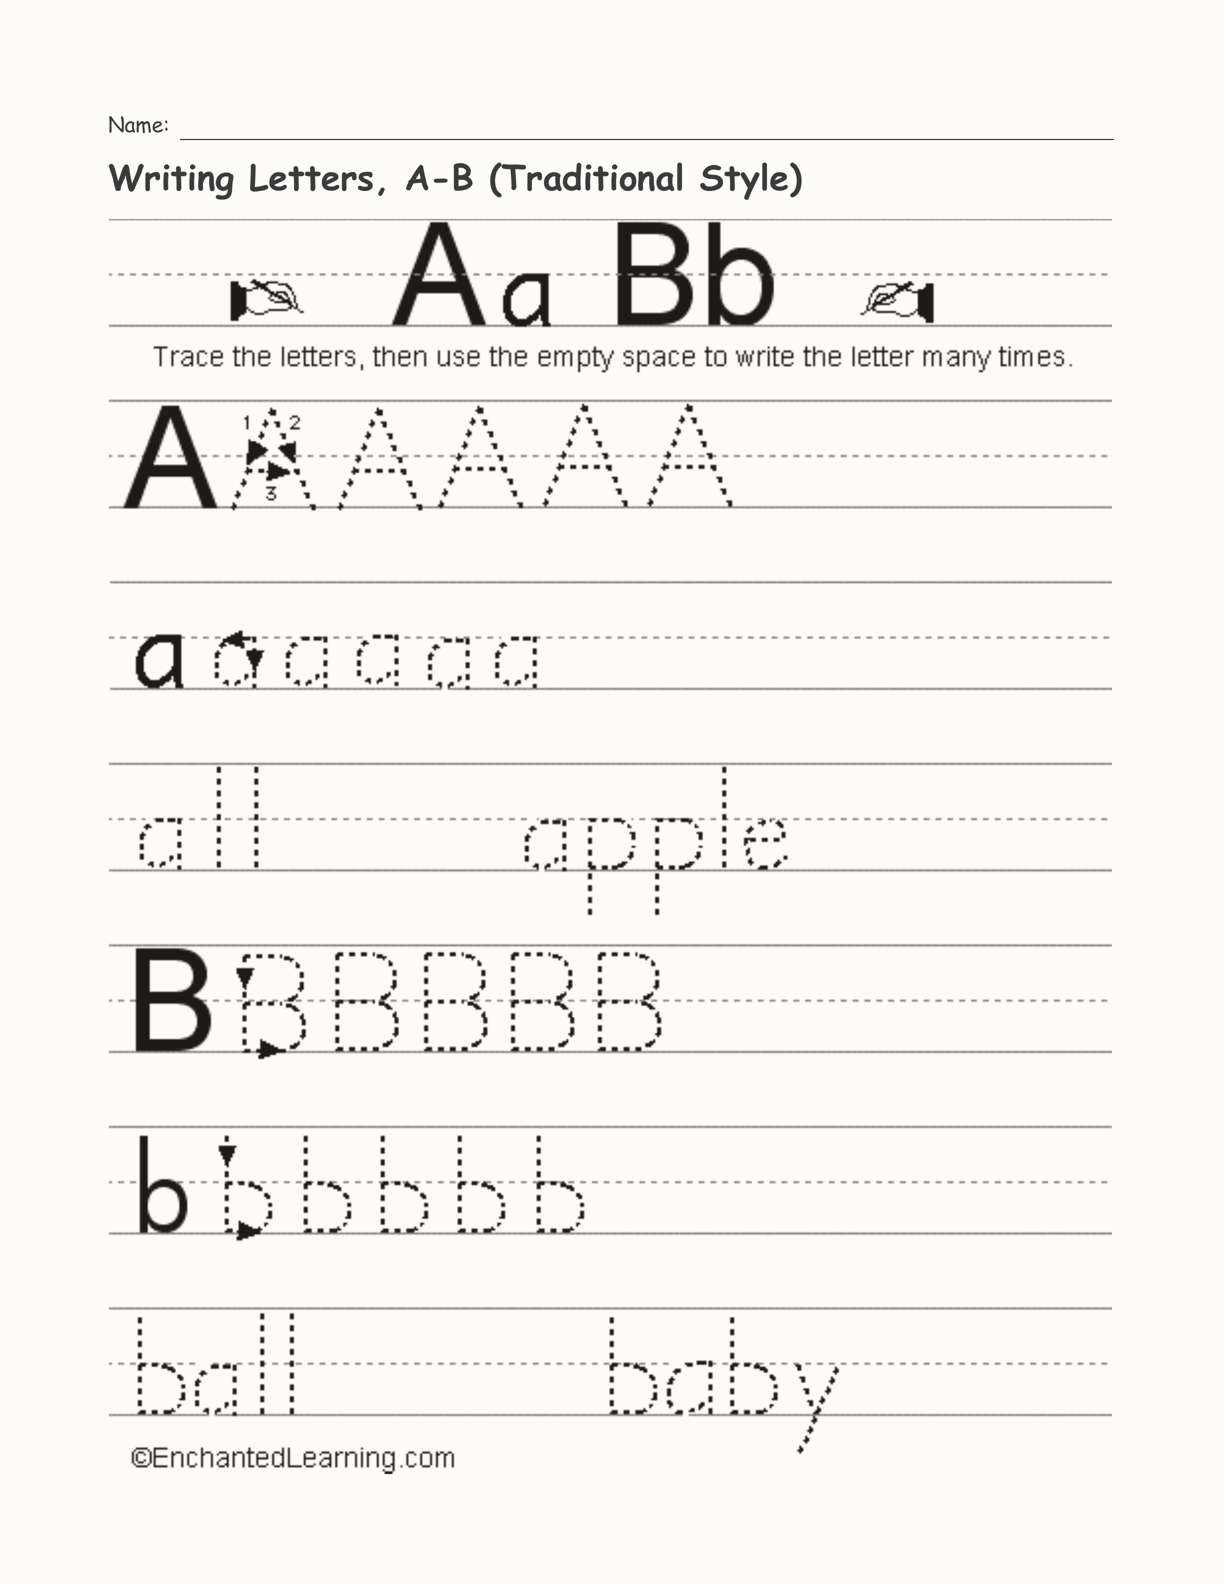 Writing Letters, A-B (Traditional Style) interactive printout page 1